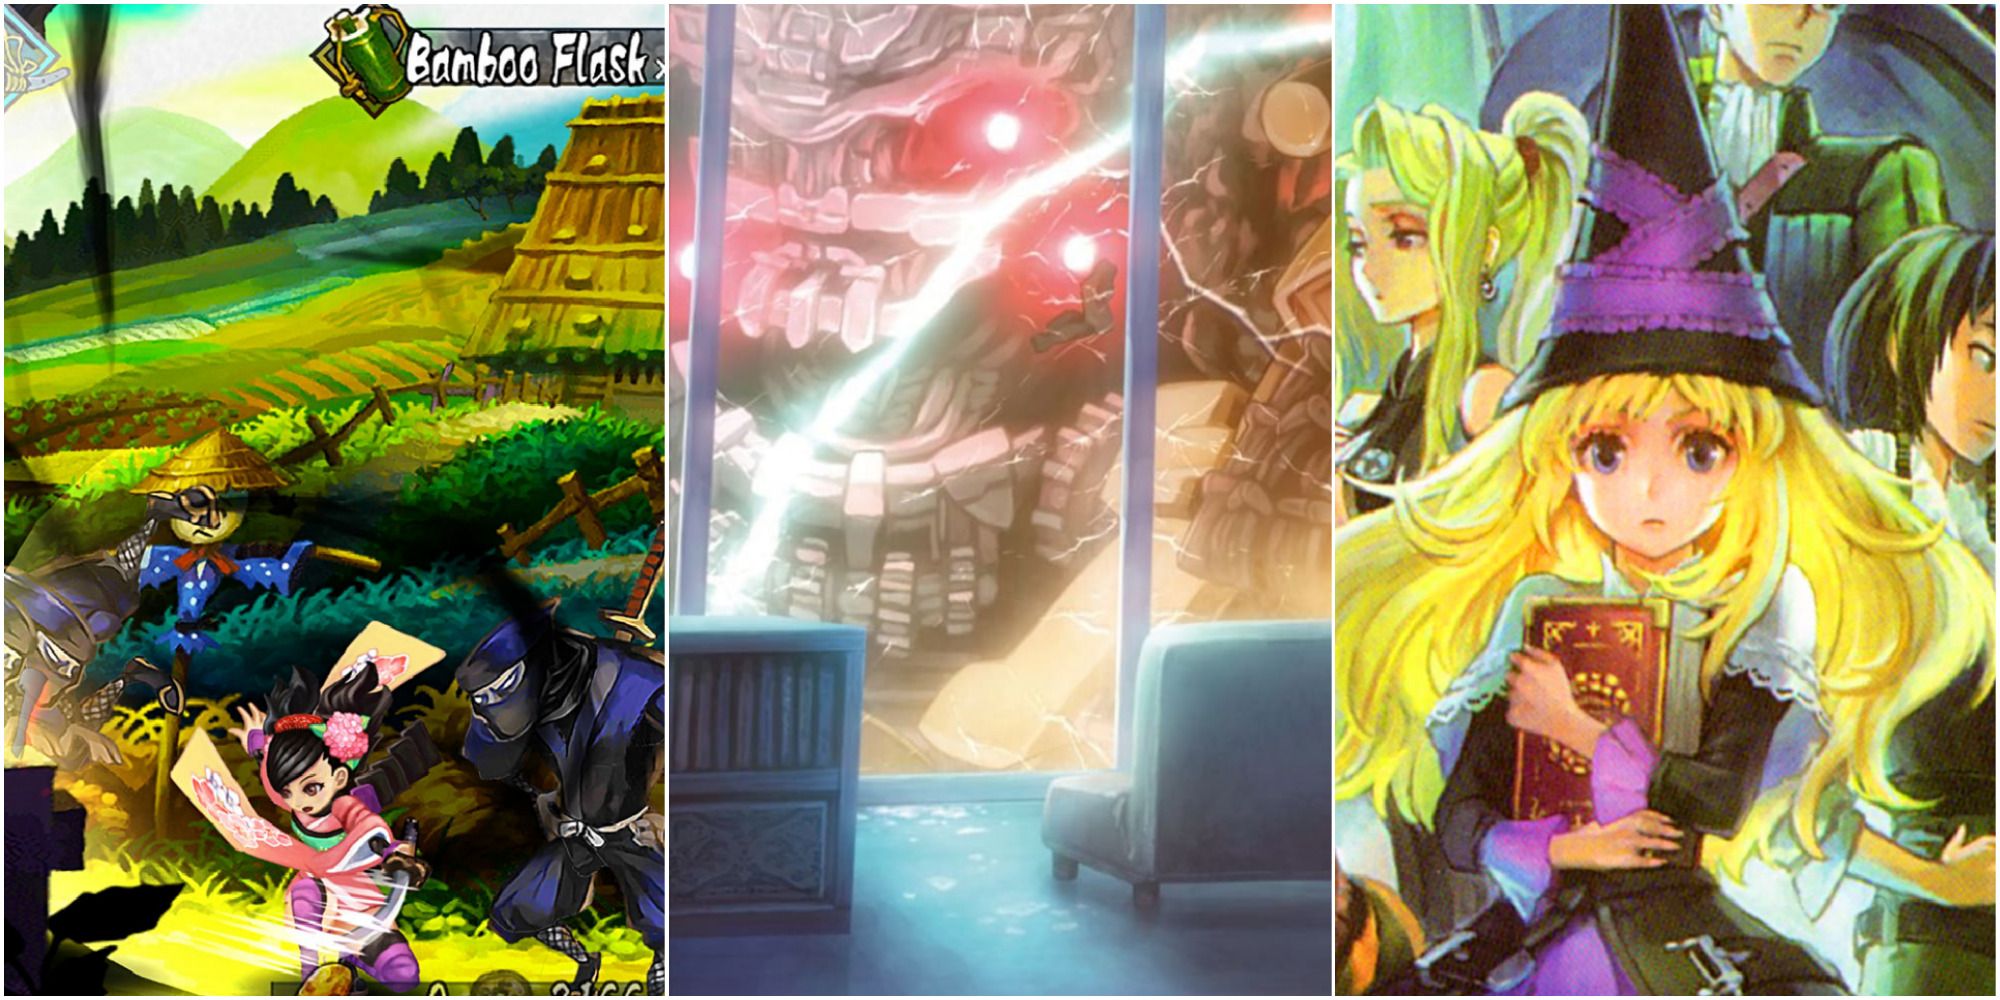 A collage of images from games developed by Vanillaware, including screenshots from Muramasa: The Demon Blade, 13 Sentinels: Aegis Rim, and GrimGrimoire